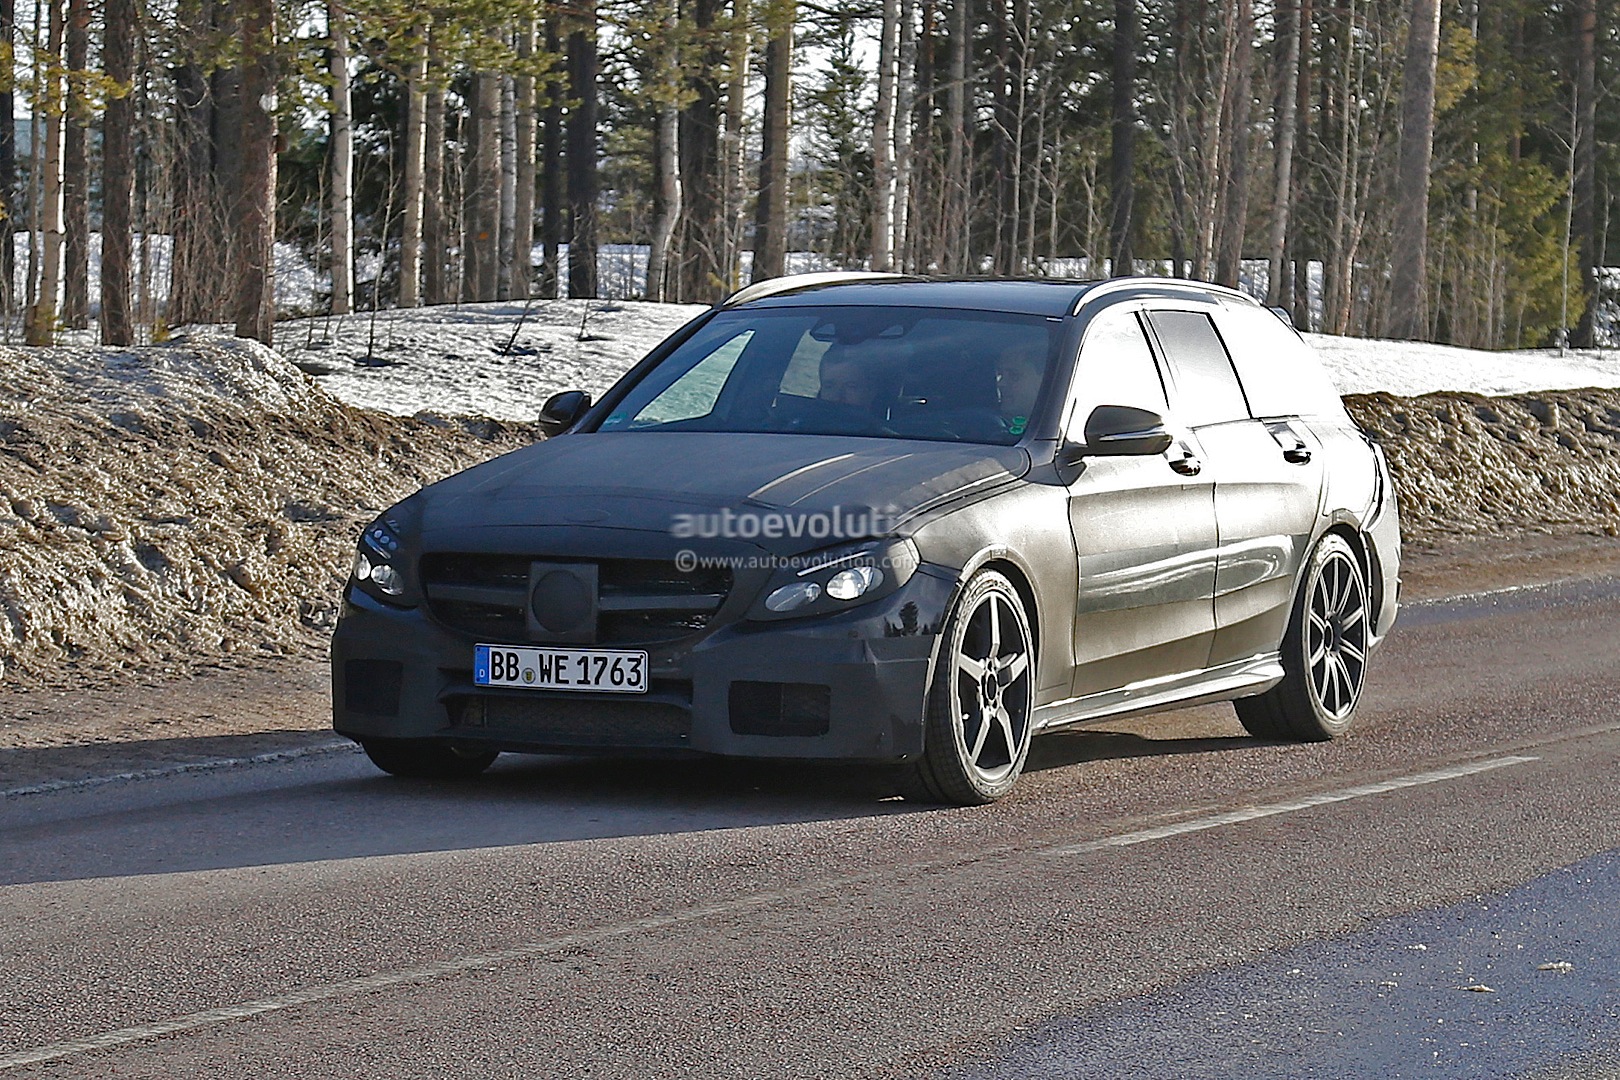 2014 - [Mercedes] Classe C [W205- S205] - Page 27 2015-c-63-amg-wagon-s205-starts-testing-photo-gallery_1